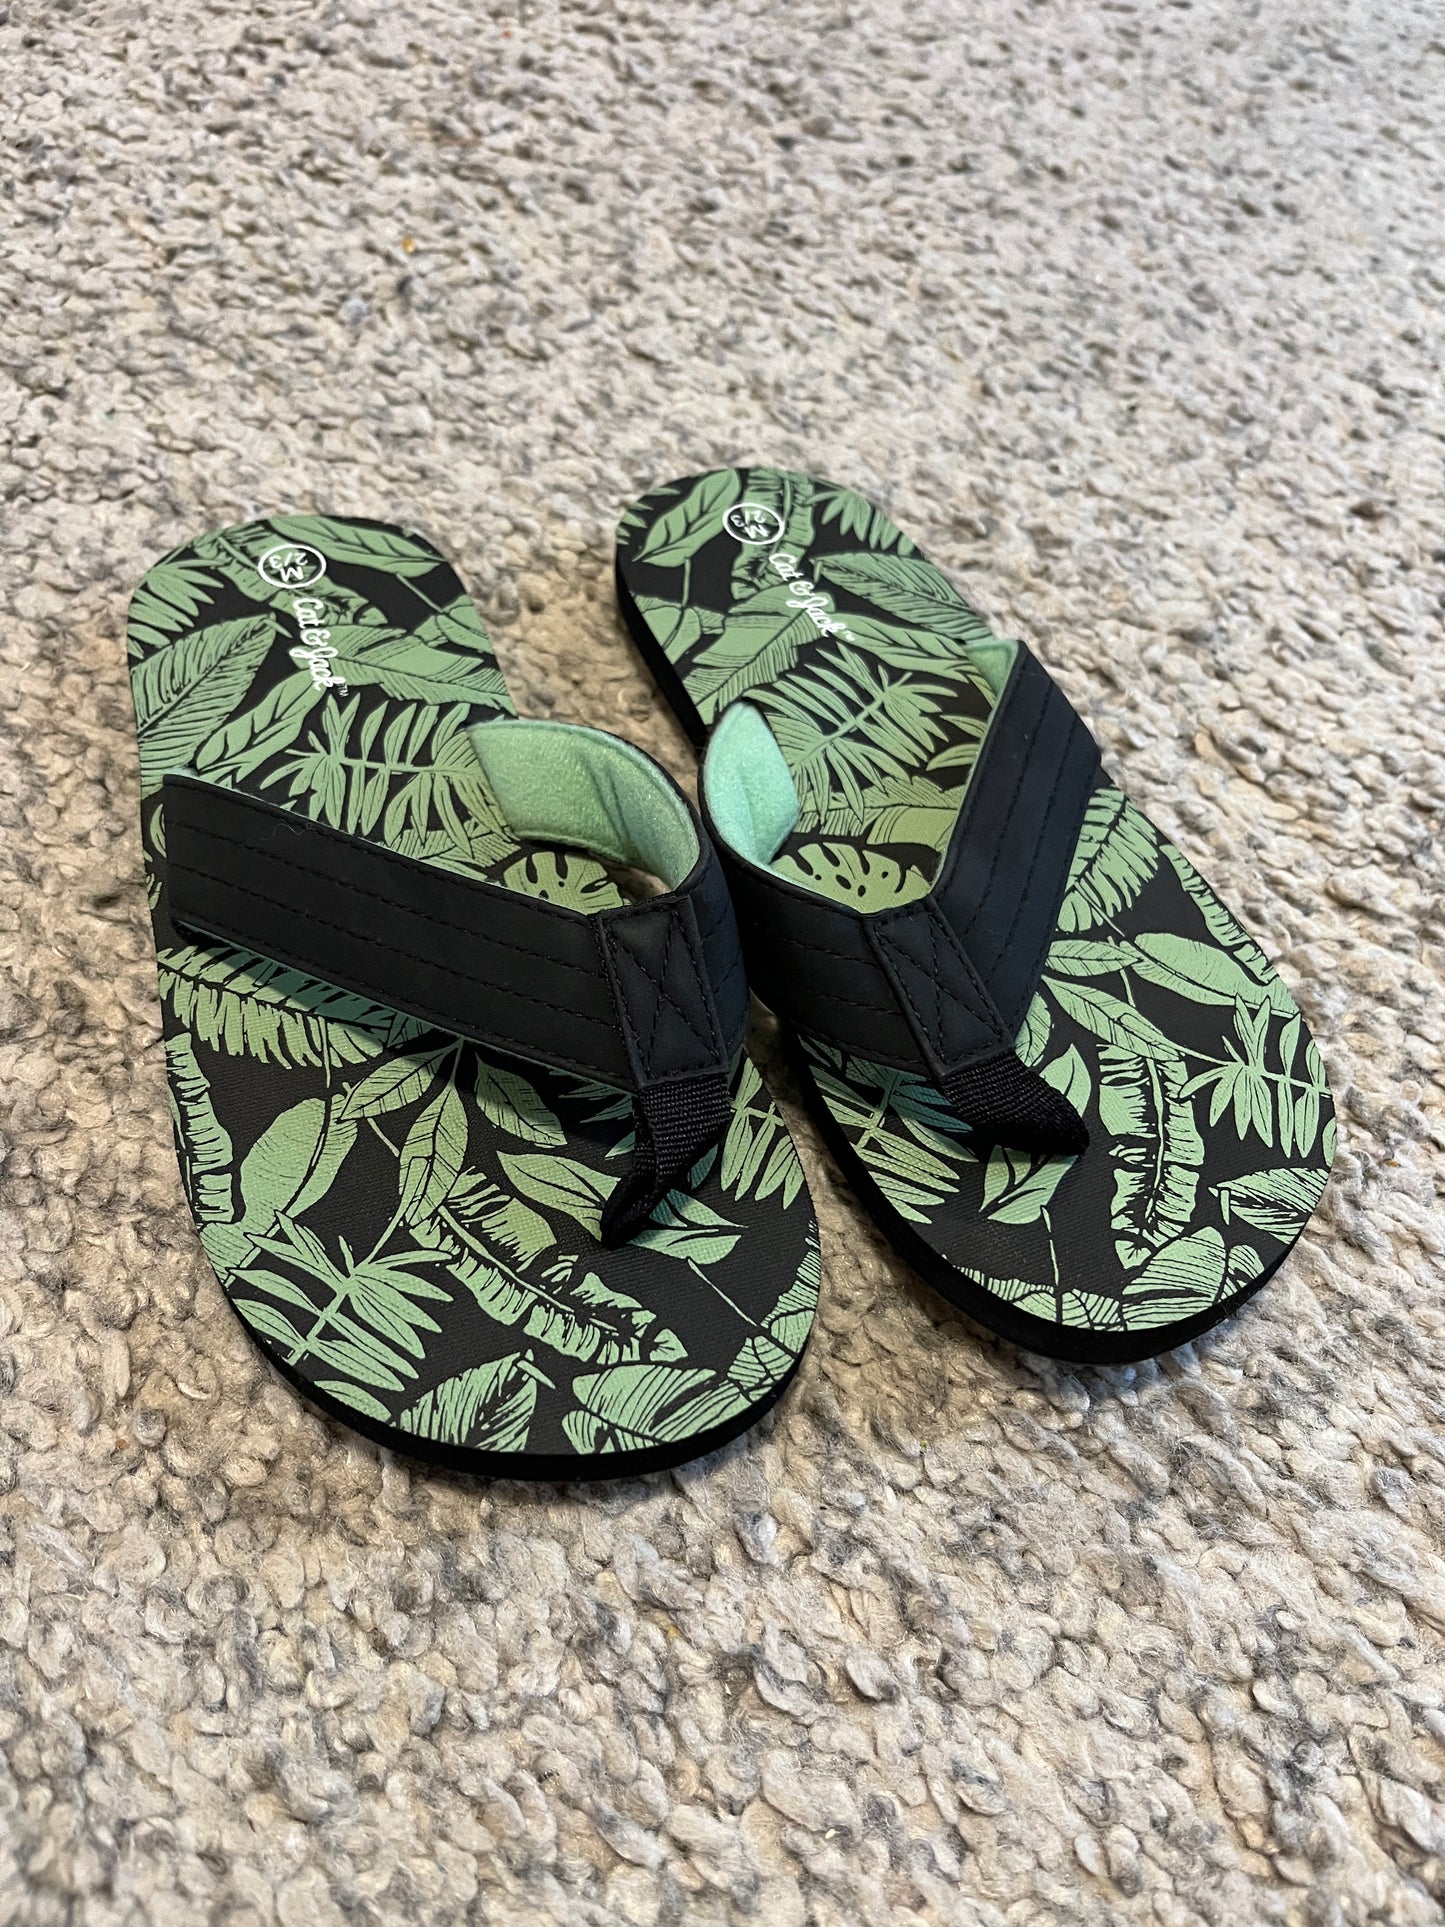 Boys Cat and Jack Black and Green Palms Sandals Size 2/3